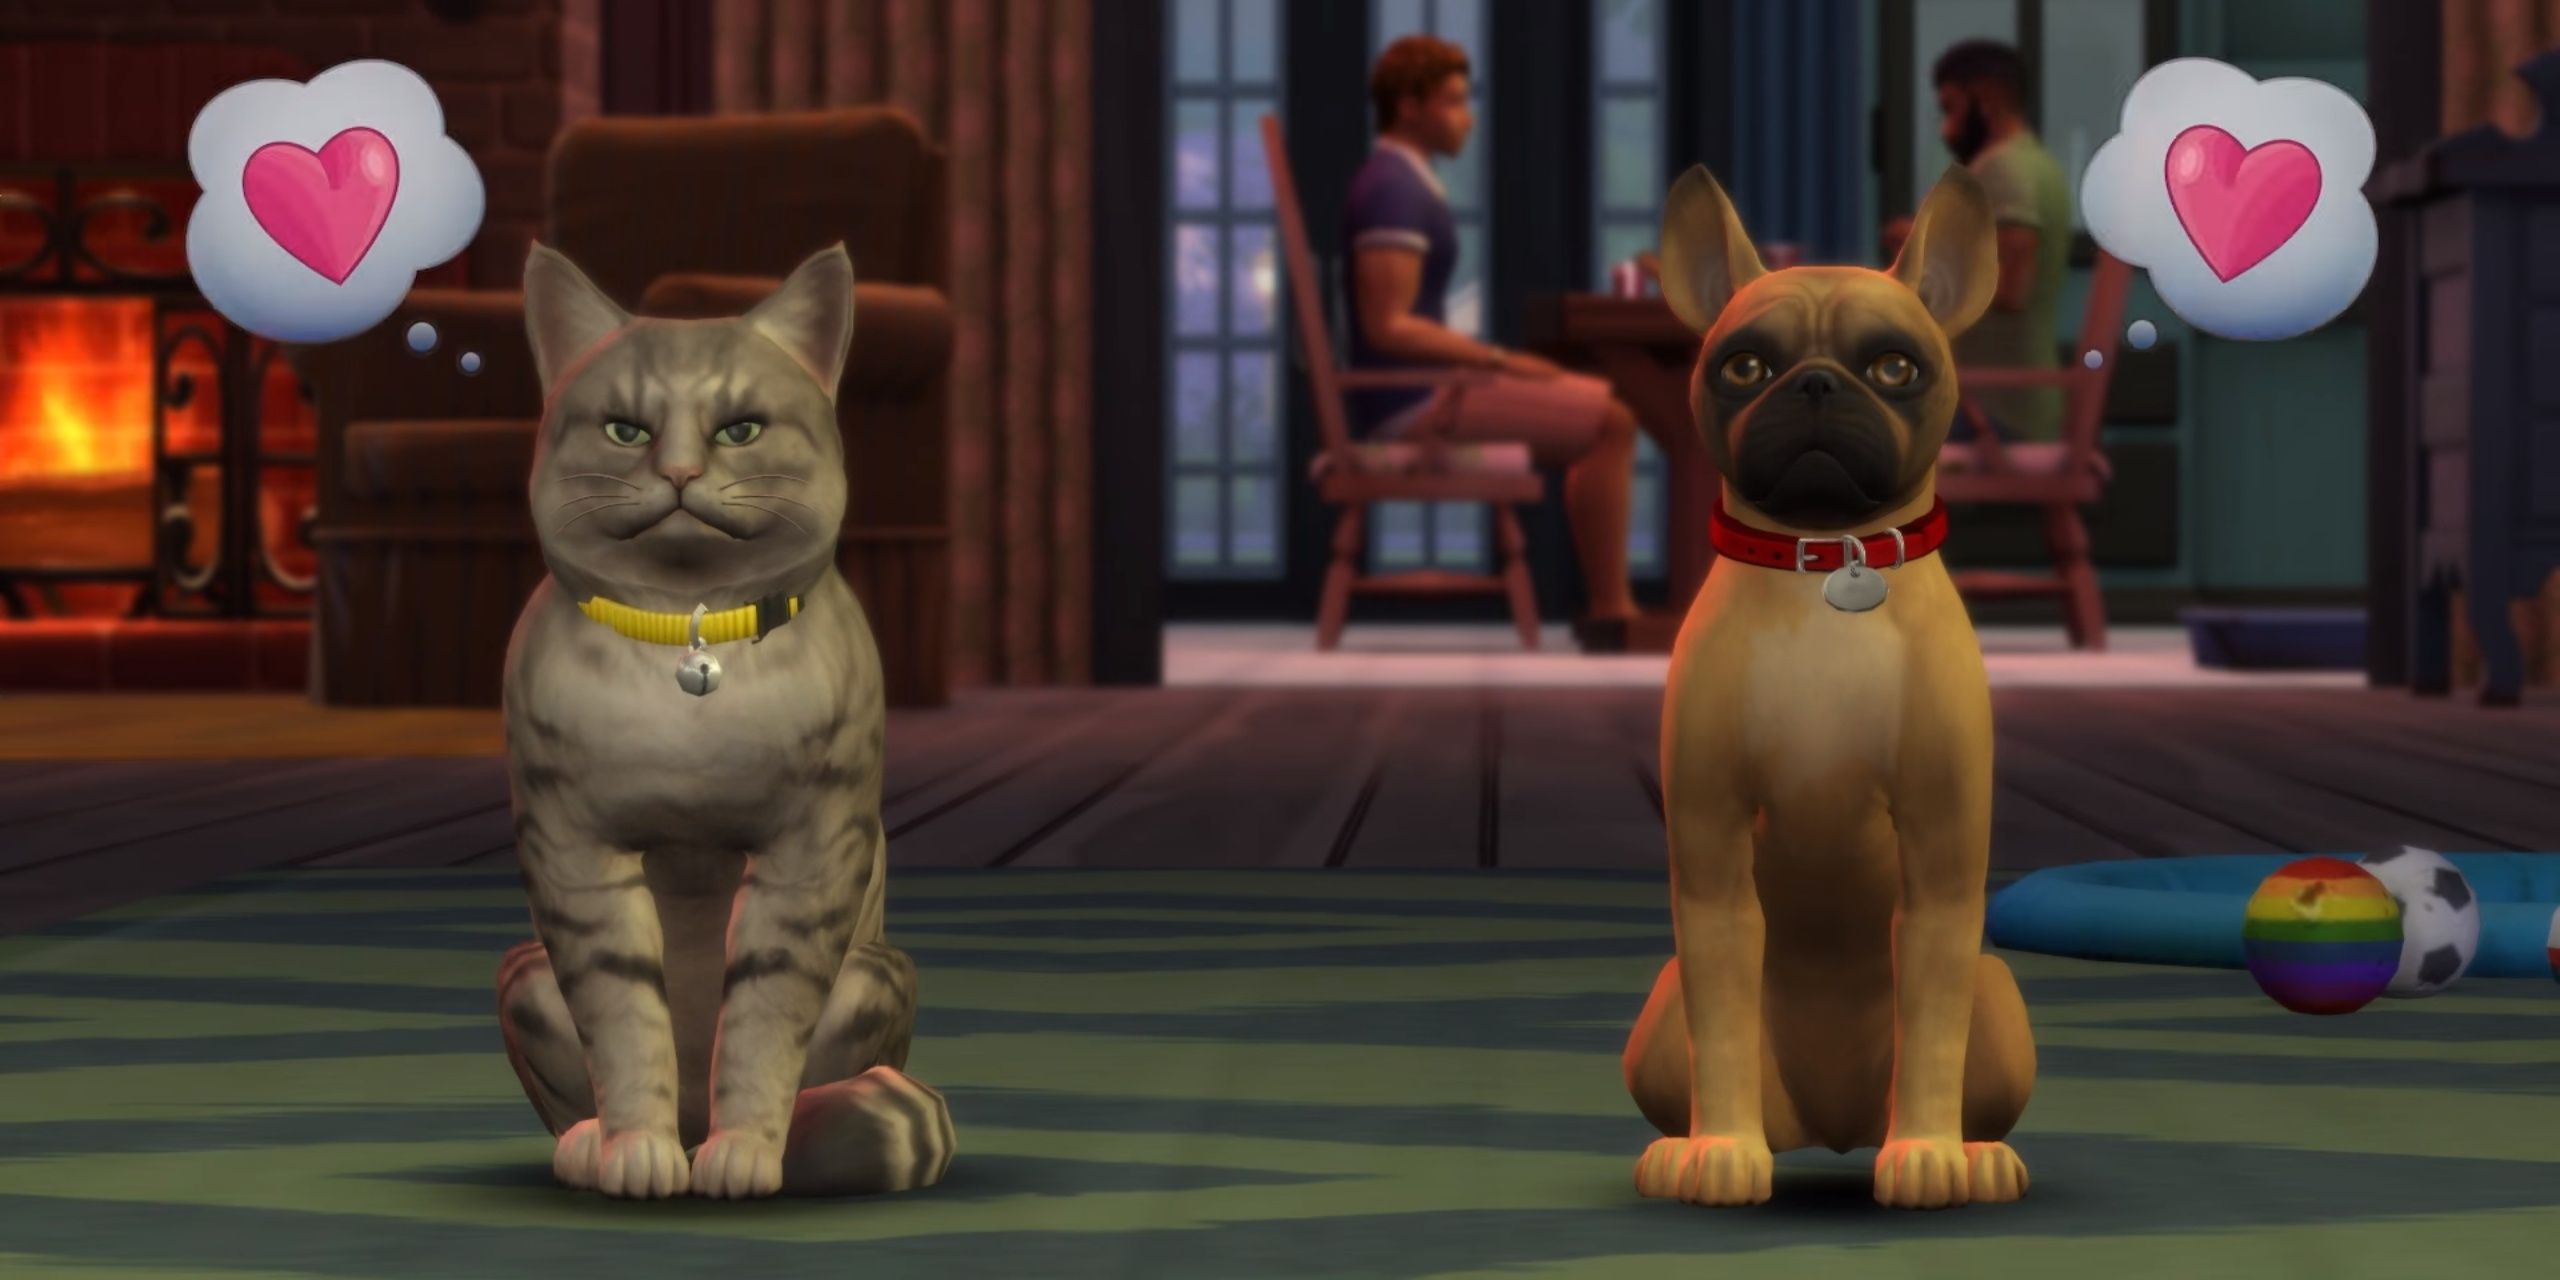 A cat and dog in The Sims 4 keep their distance, but their love-heart thought bubbles suggest that they're finally warming up to each other.